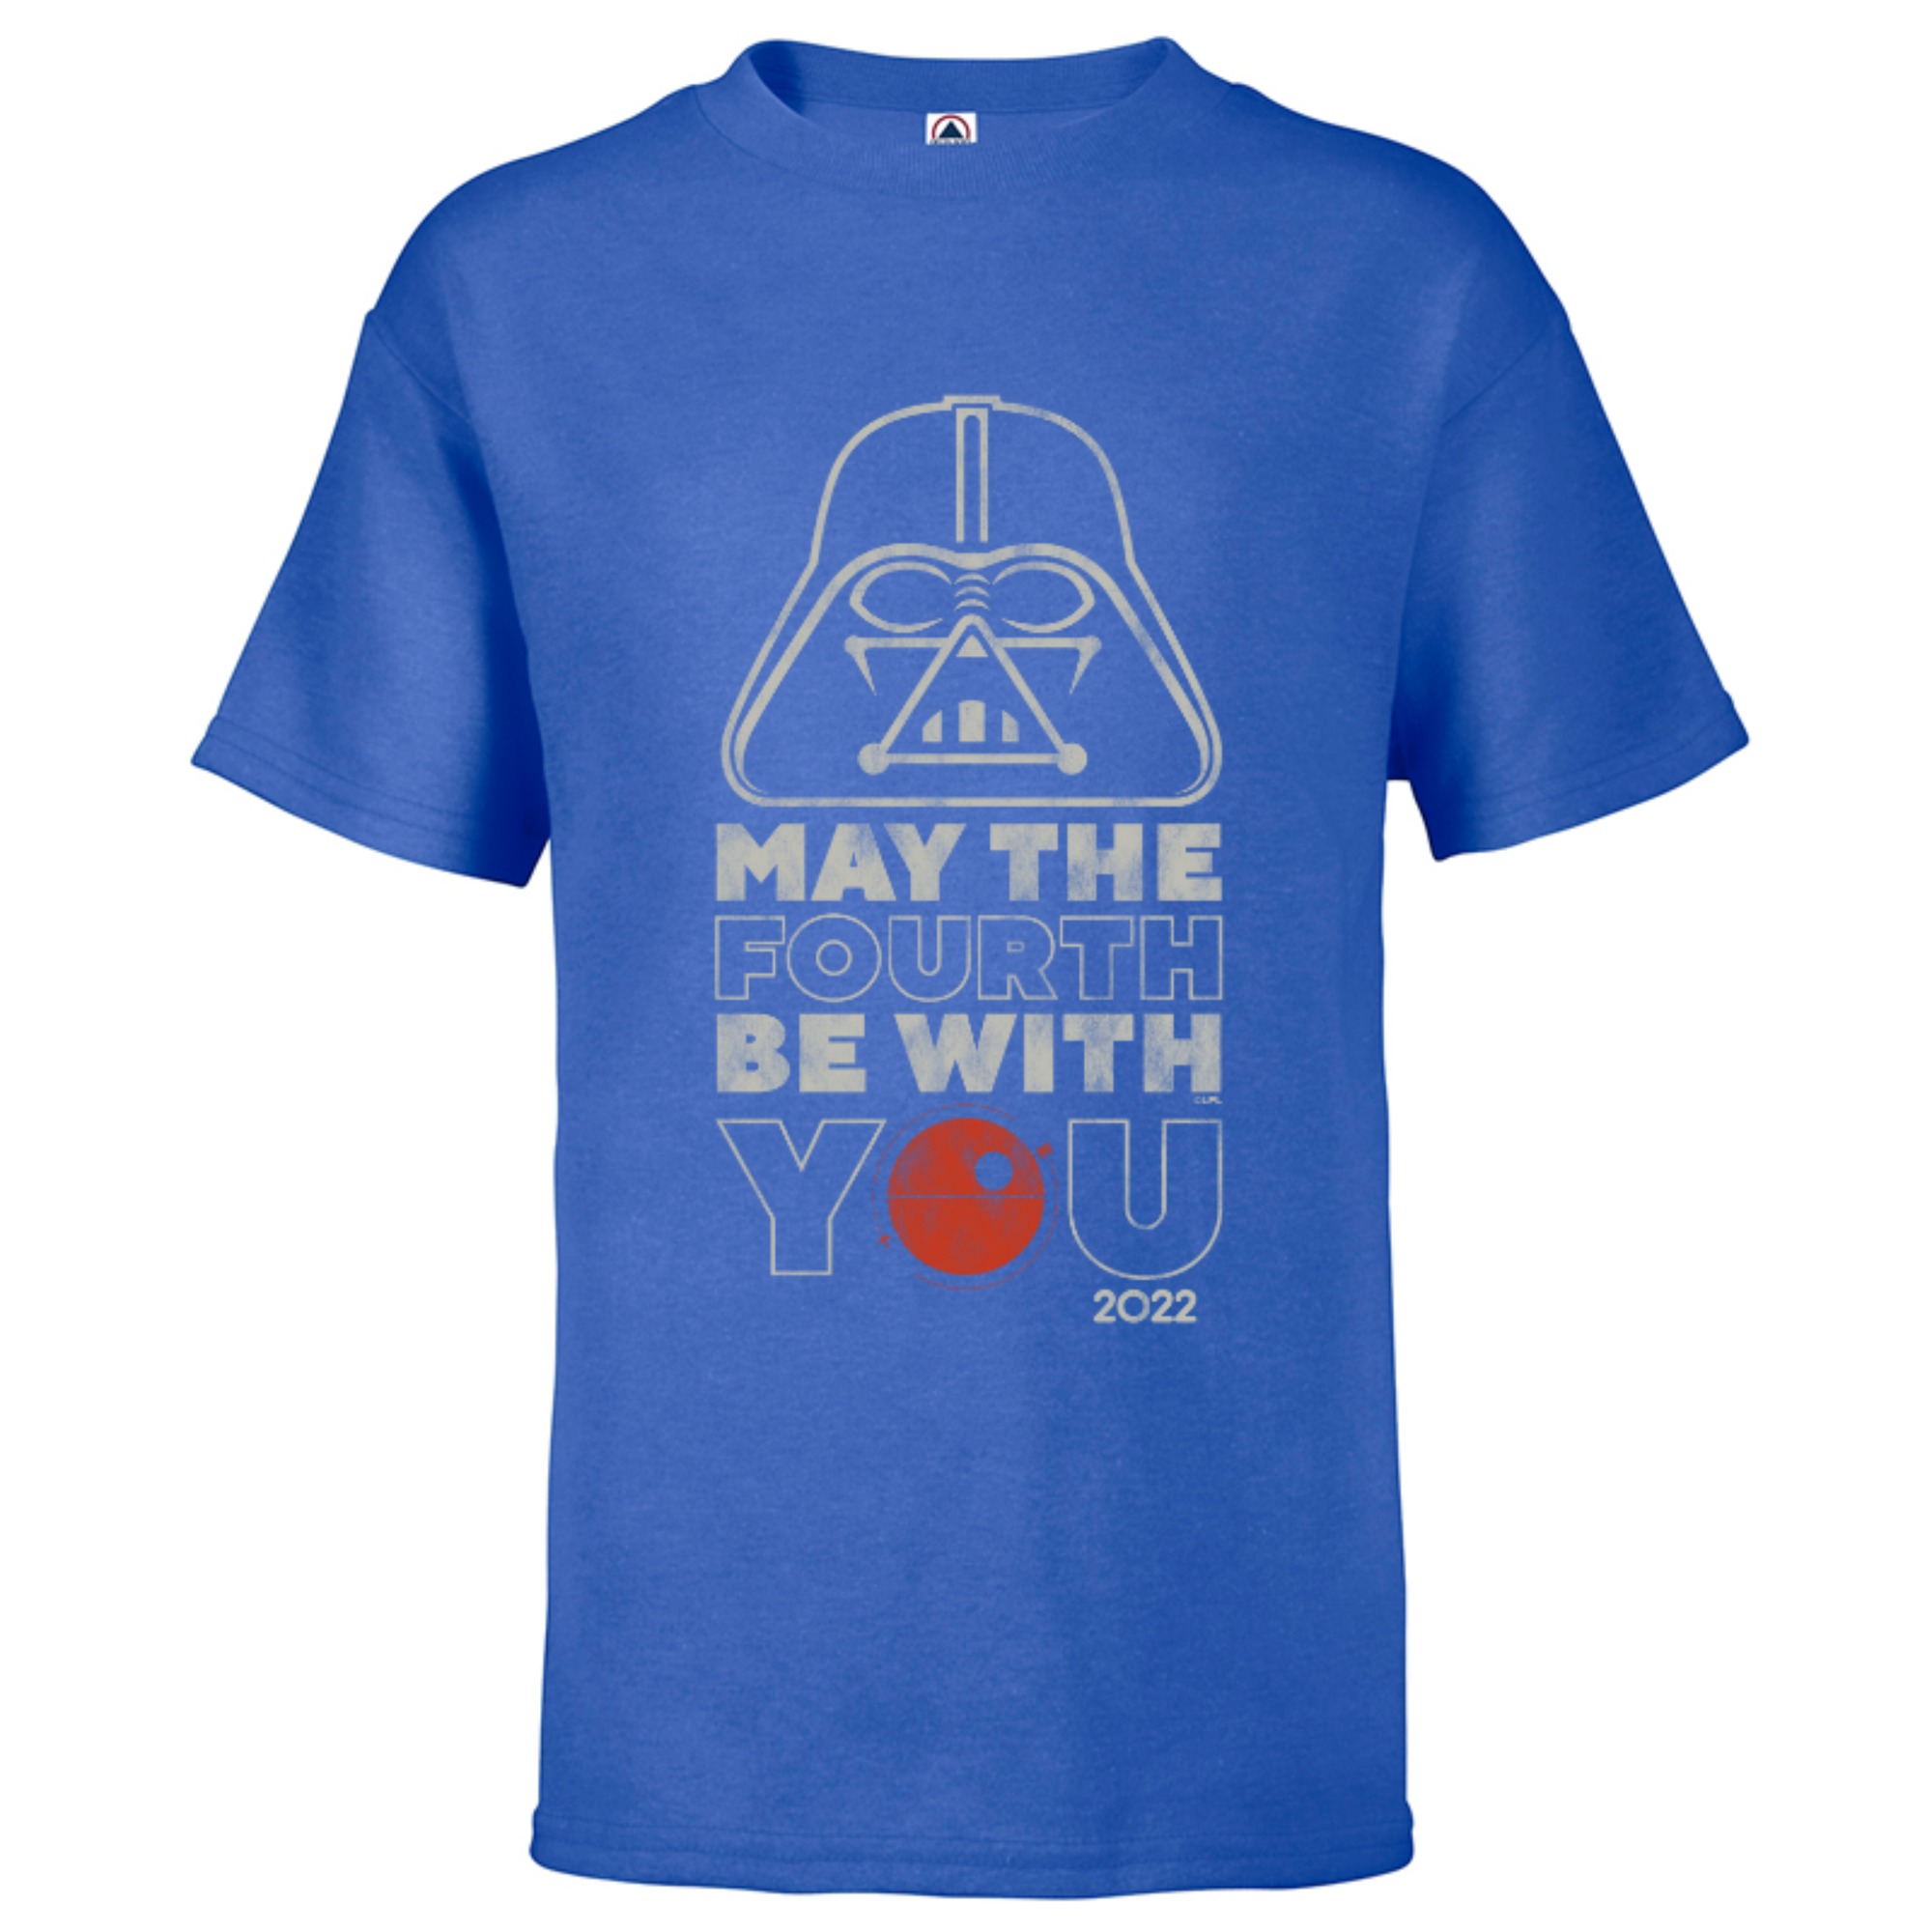 Star Wars Darth Vader May the Fourth Be With You - Short Sleeve T-Shirt for Kids - Customized-Royal